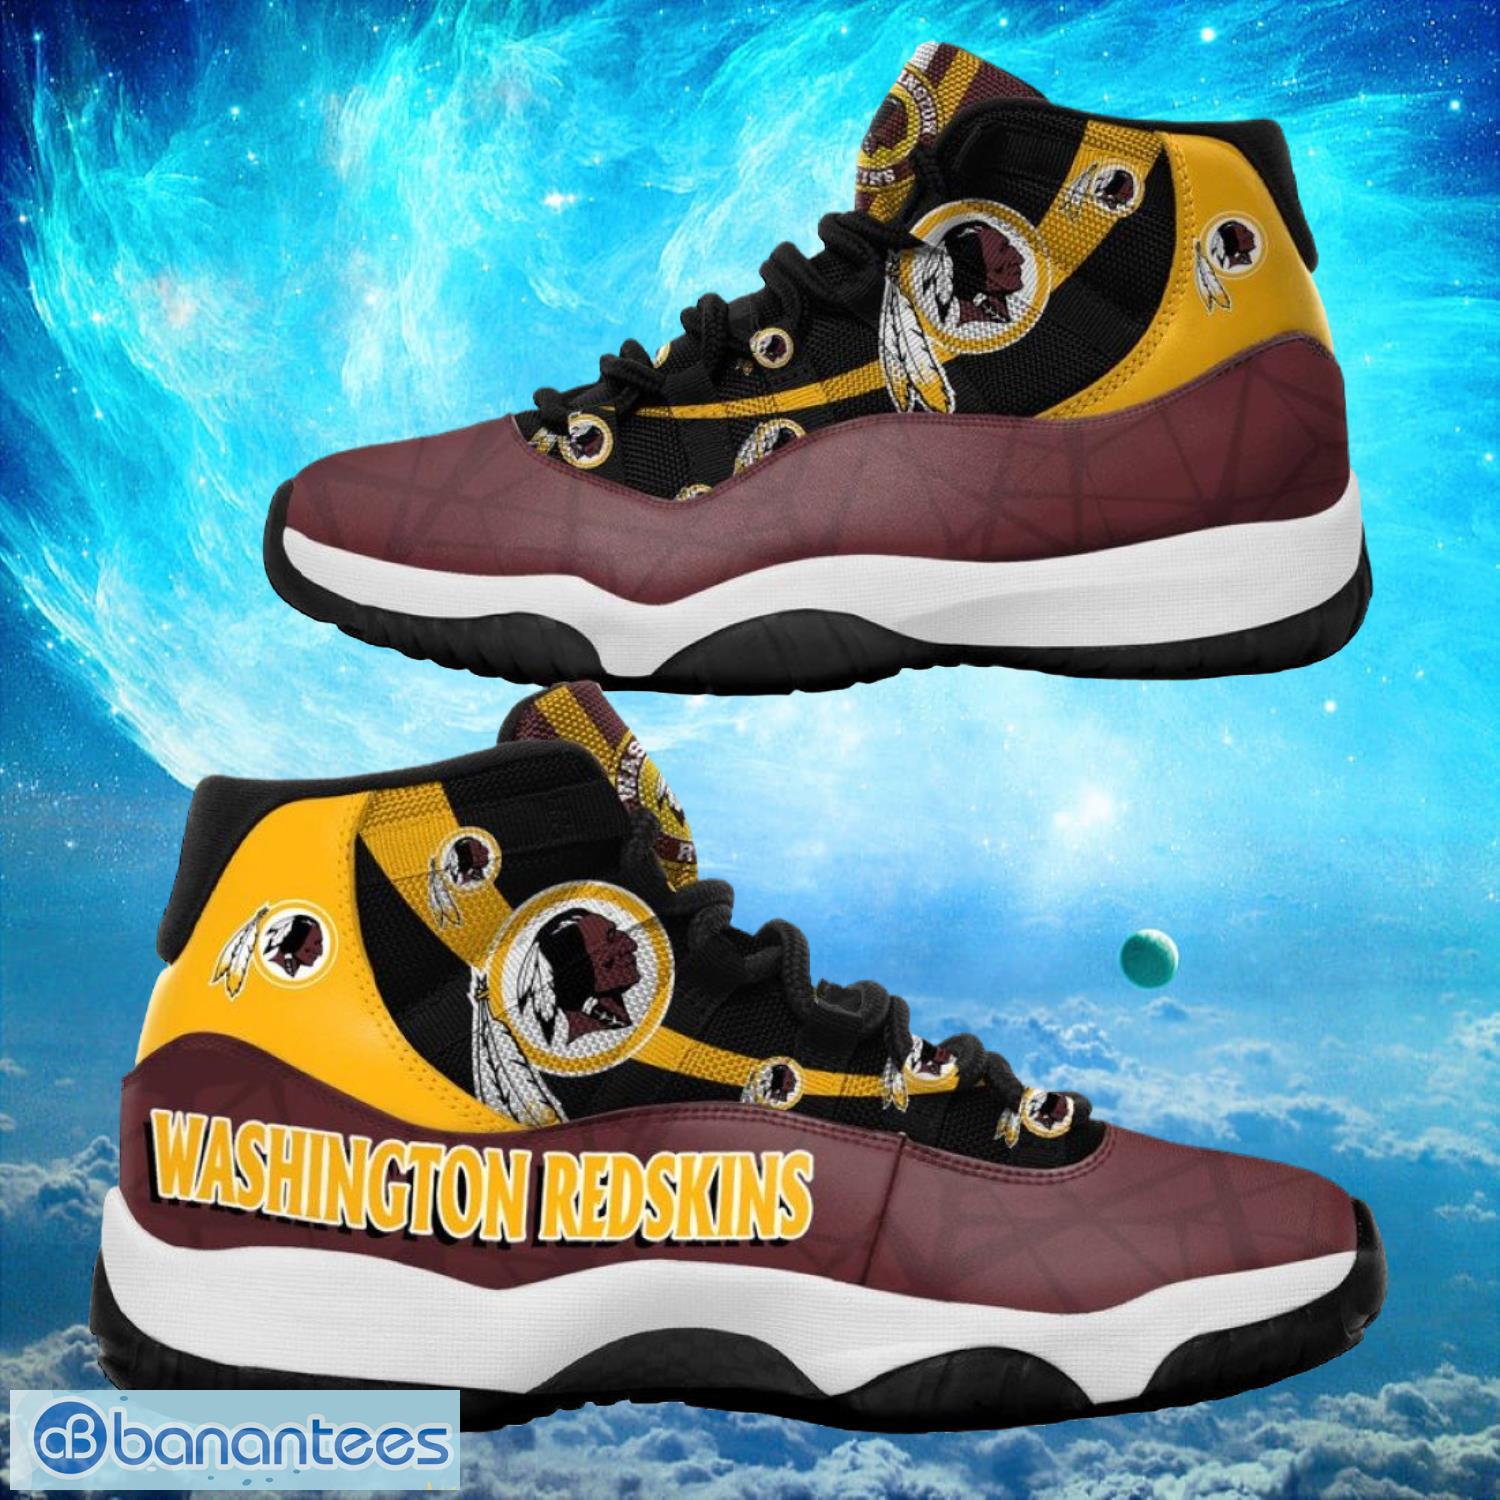 Washington Redskins NFL Air Jordan 11 Sneakers Shoes Gift For Fans Product Photo 1